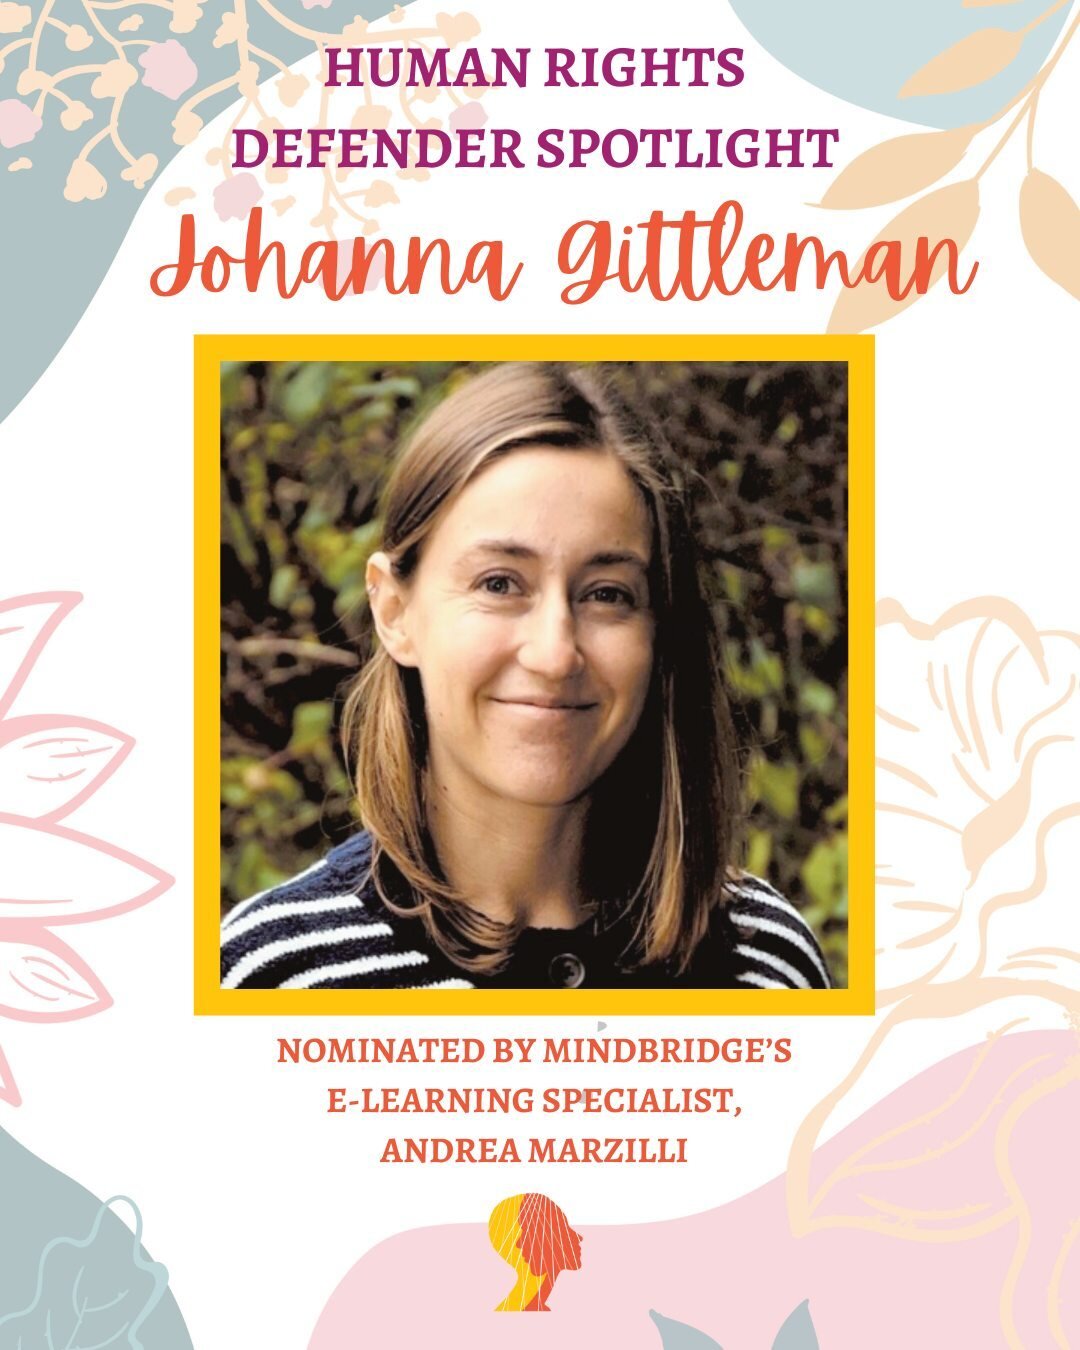 Meet Johanna Gittleman, a dedicated 4th-grade educator who centers social-emotional learning, justice, and inclusion in and outside of the classroom.

In the classroom, Johanna builds a foundation of respect amongst her students. She prioritizes buil